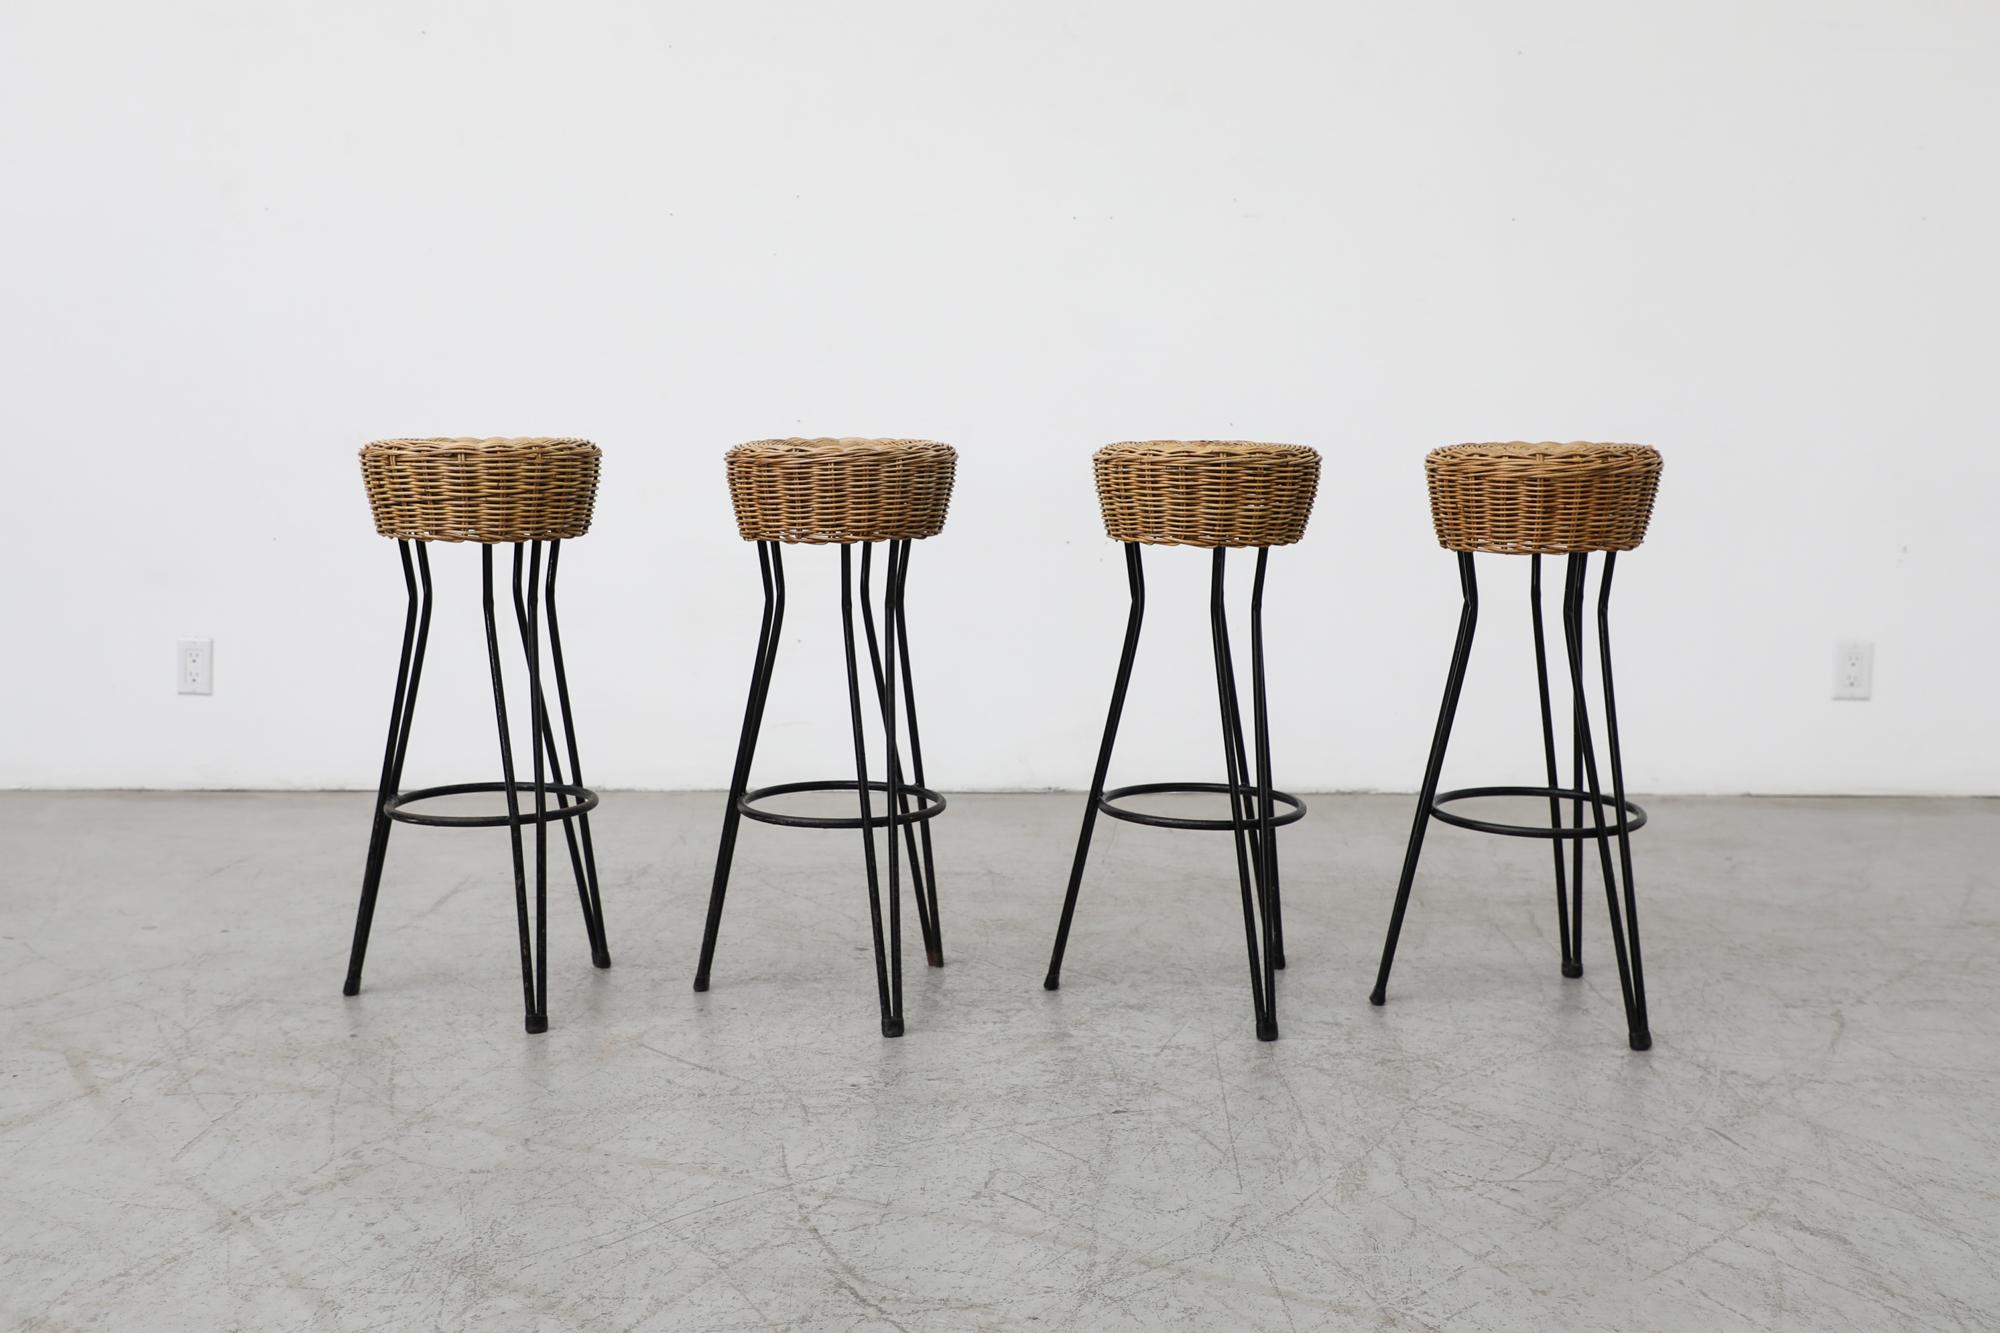 Beautiful set of 4 Dirk Van Sliedregt style bar stools with woven rattan seats and black enameled iron frames with hairpin legs. In original condition with some visible signs of wear consistent with their age and use. Sold as a set of 4. Other